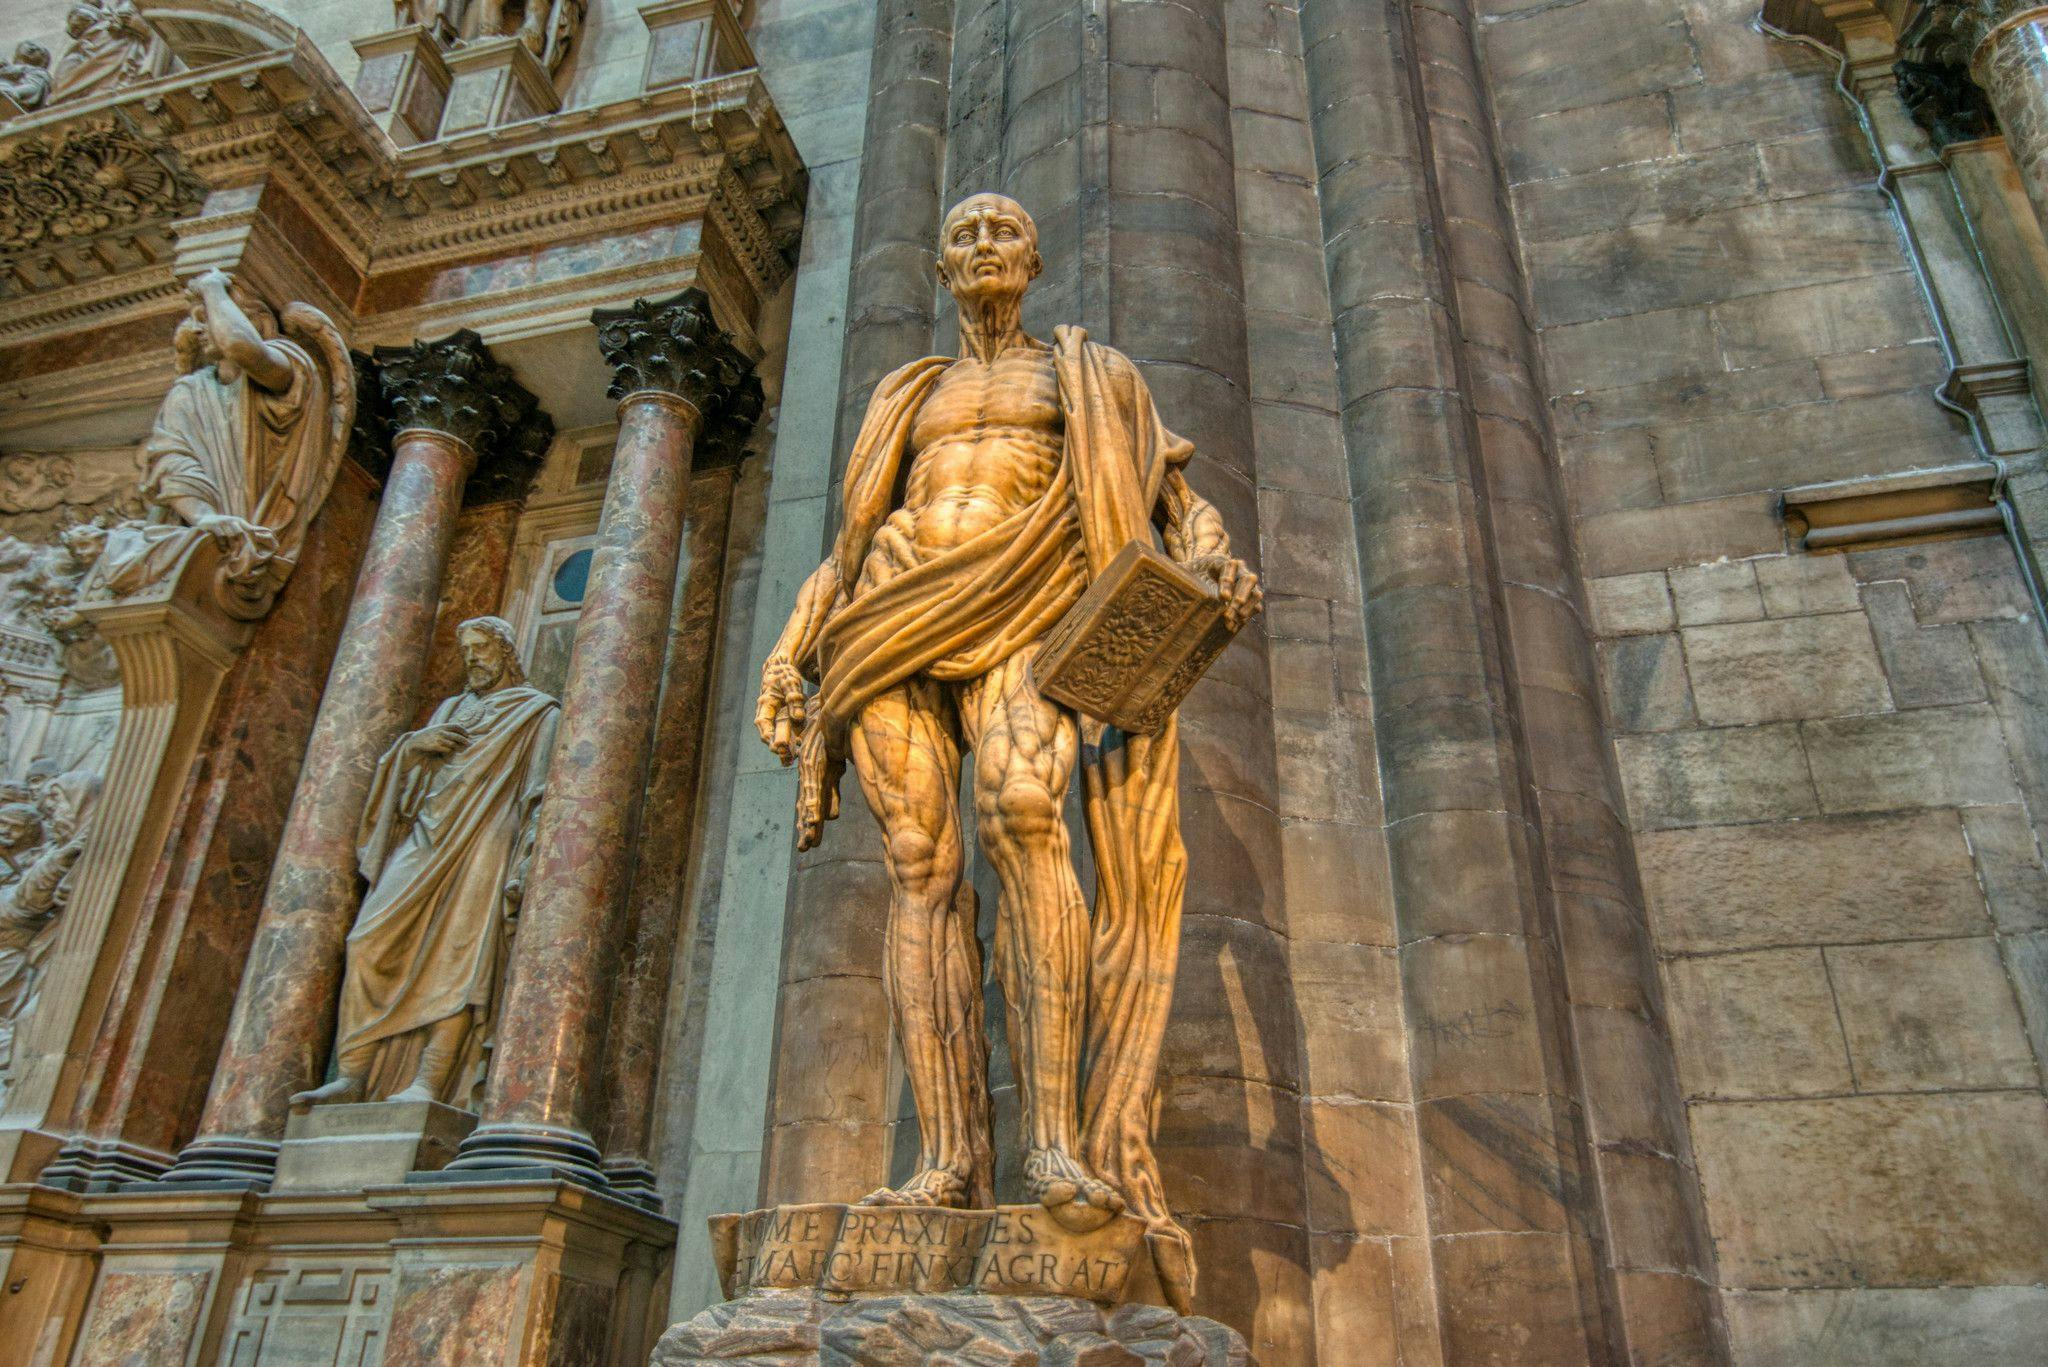 View of the statue of Marco D'Agrate inside the Duomo of Milan (by Jorge Làscar, CC BY 2.0 via Flickr)